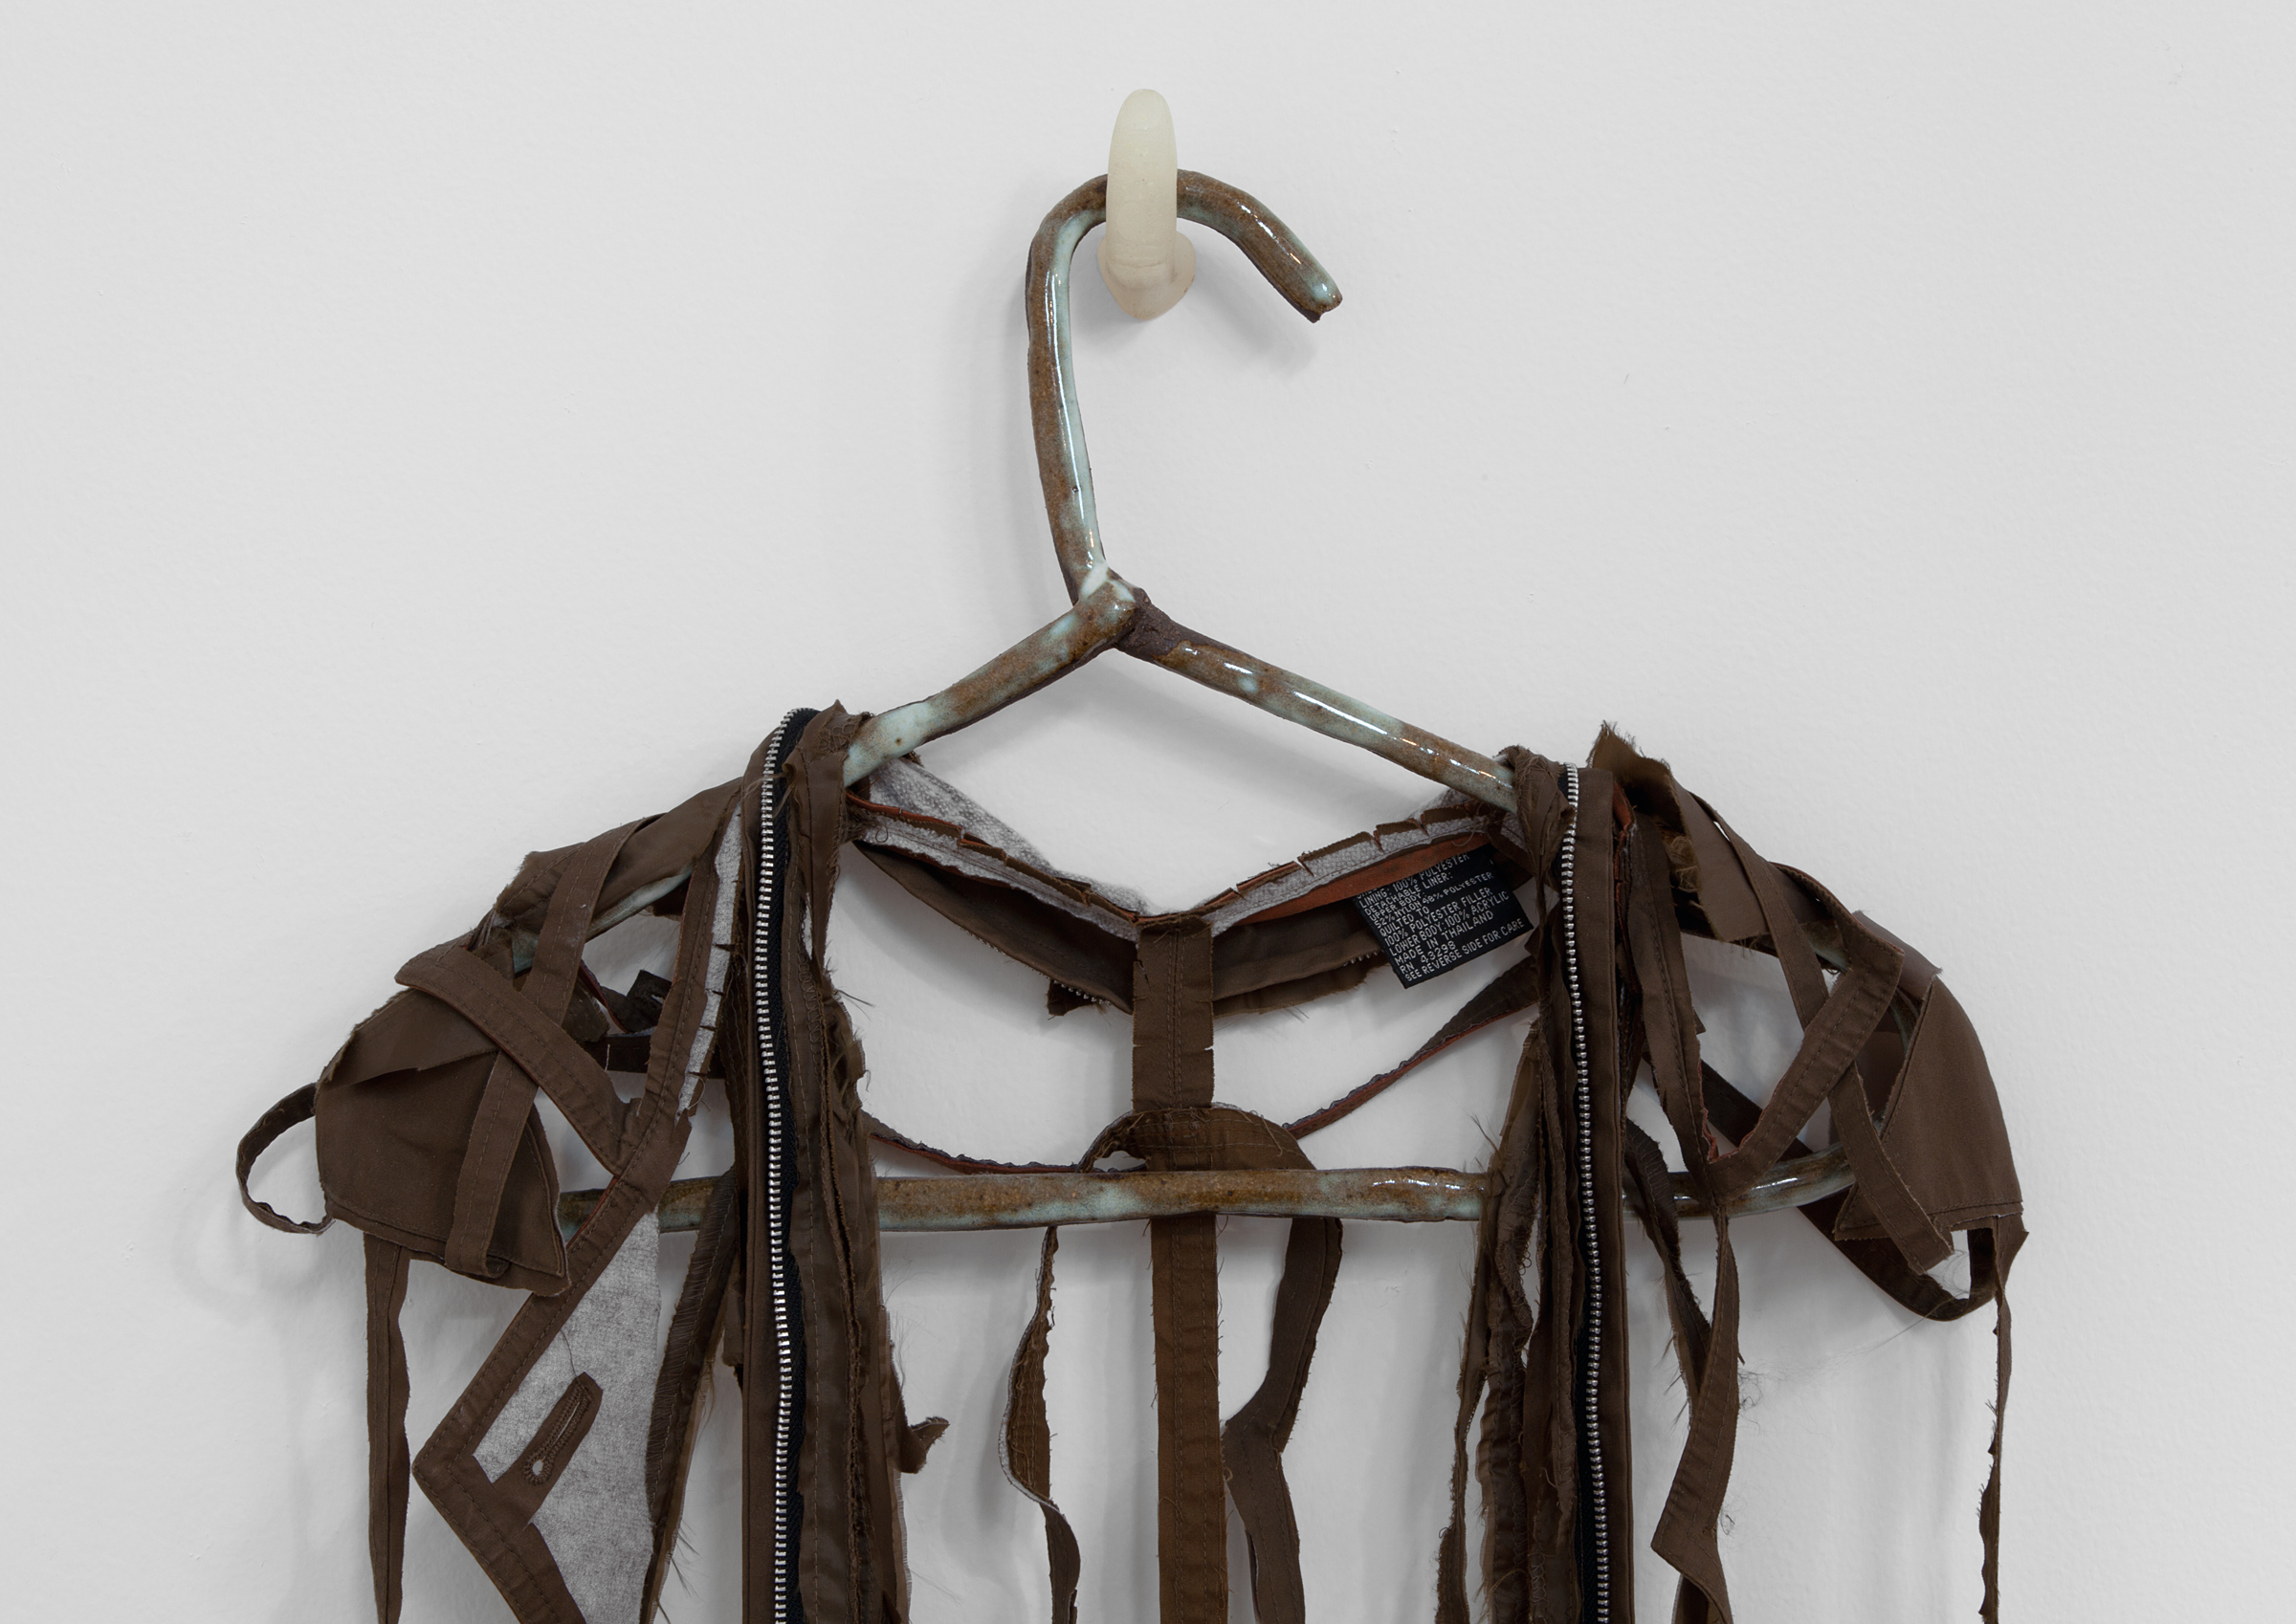   ANNA SEW HOY  (detail)  chocolate/chocolat , fired stoneware, trench coat and resin finger hook, 58.5" x 18" x 3.5", 2012 